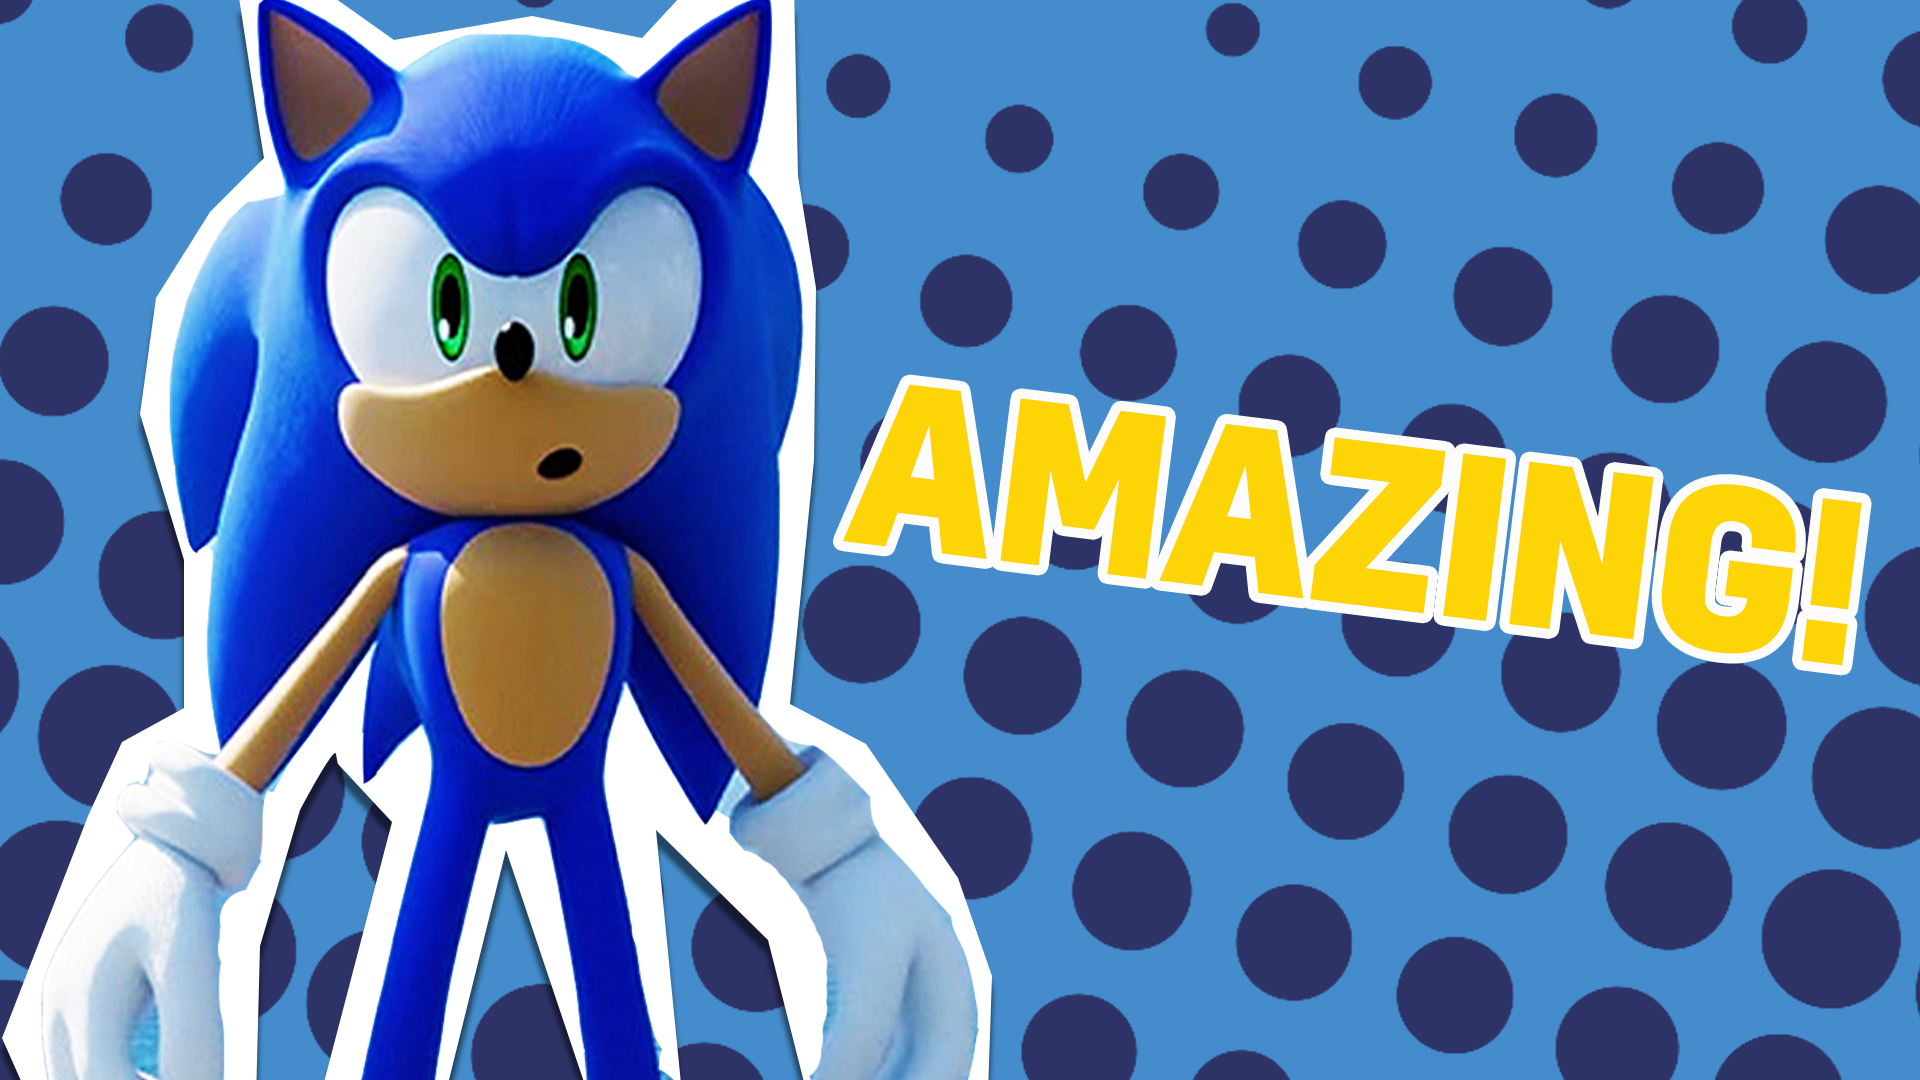 OMG! You're officially the master of hard Sonic quizzes, because you got 100%! Congrats!